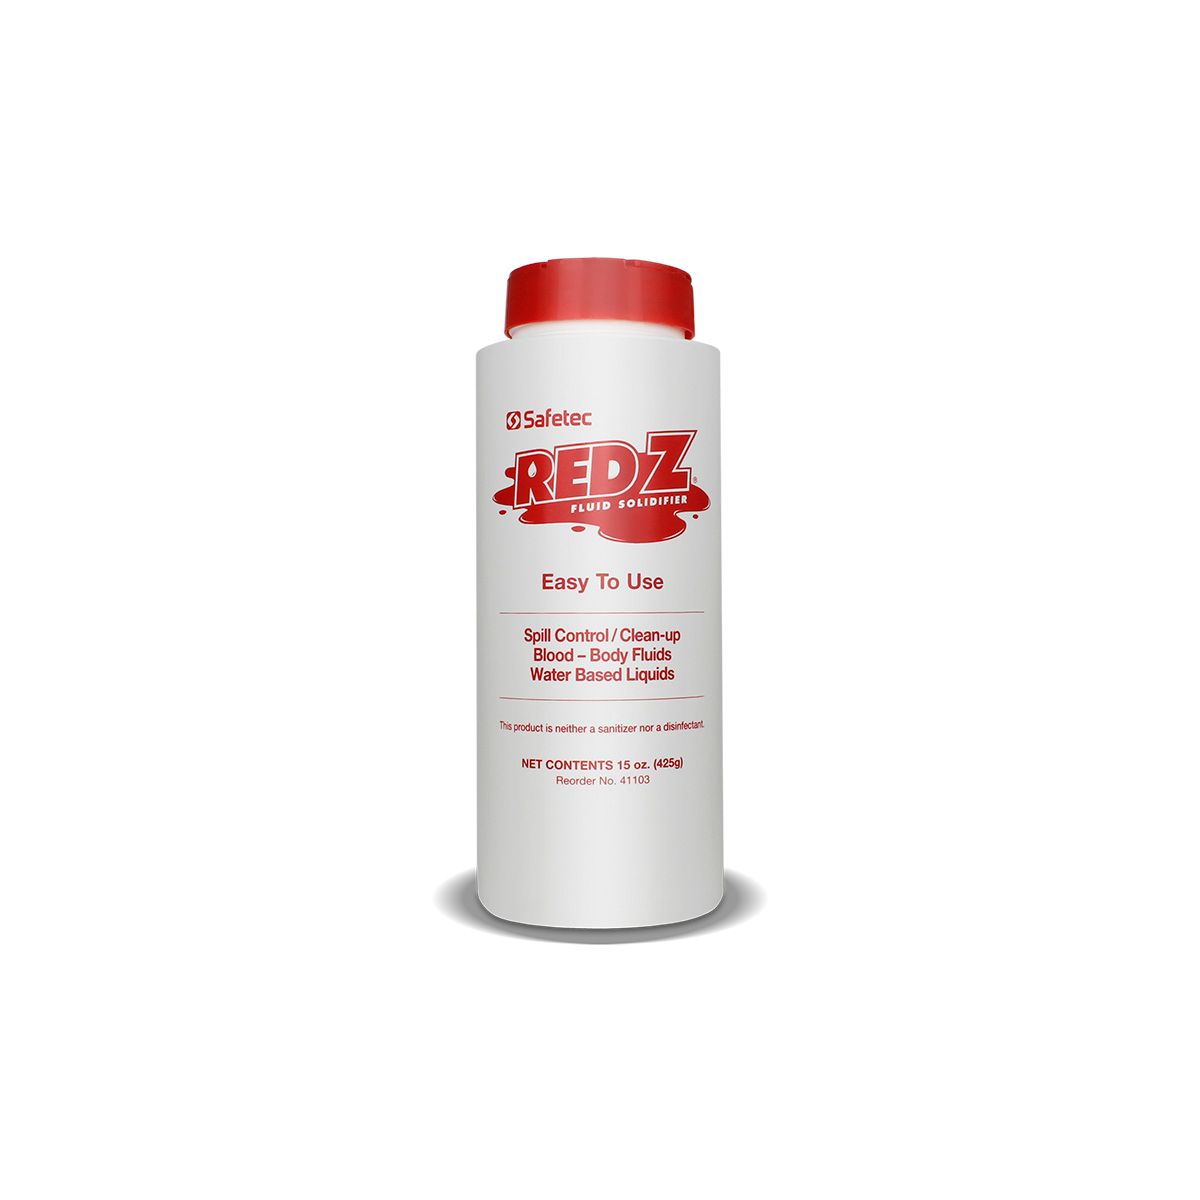 Red Z® Spill Control Solidifier Shaker Top